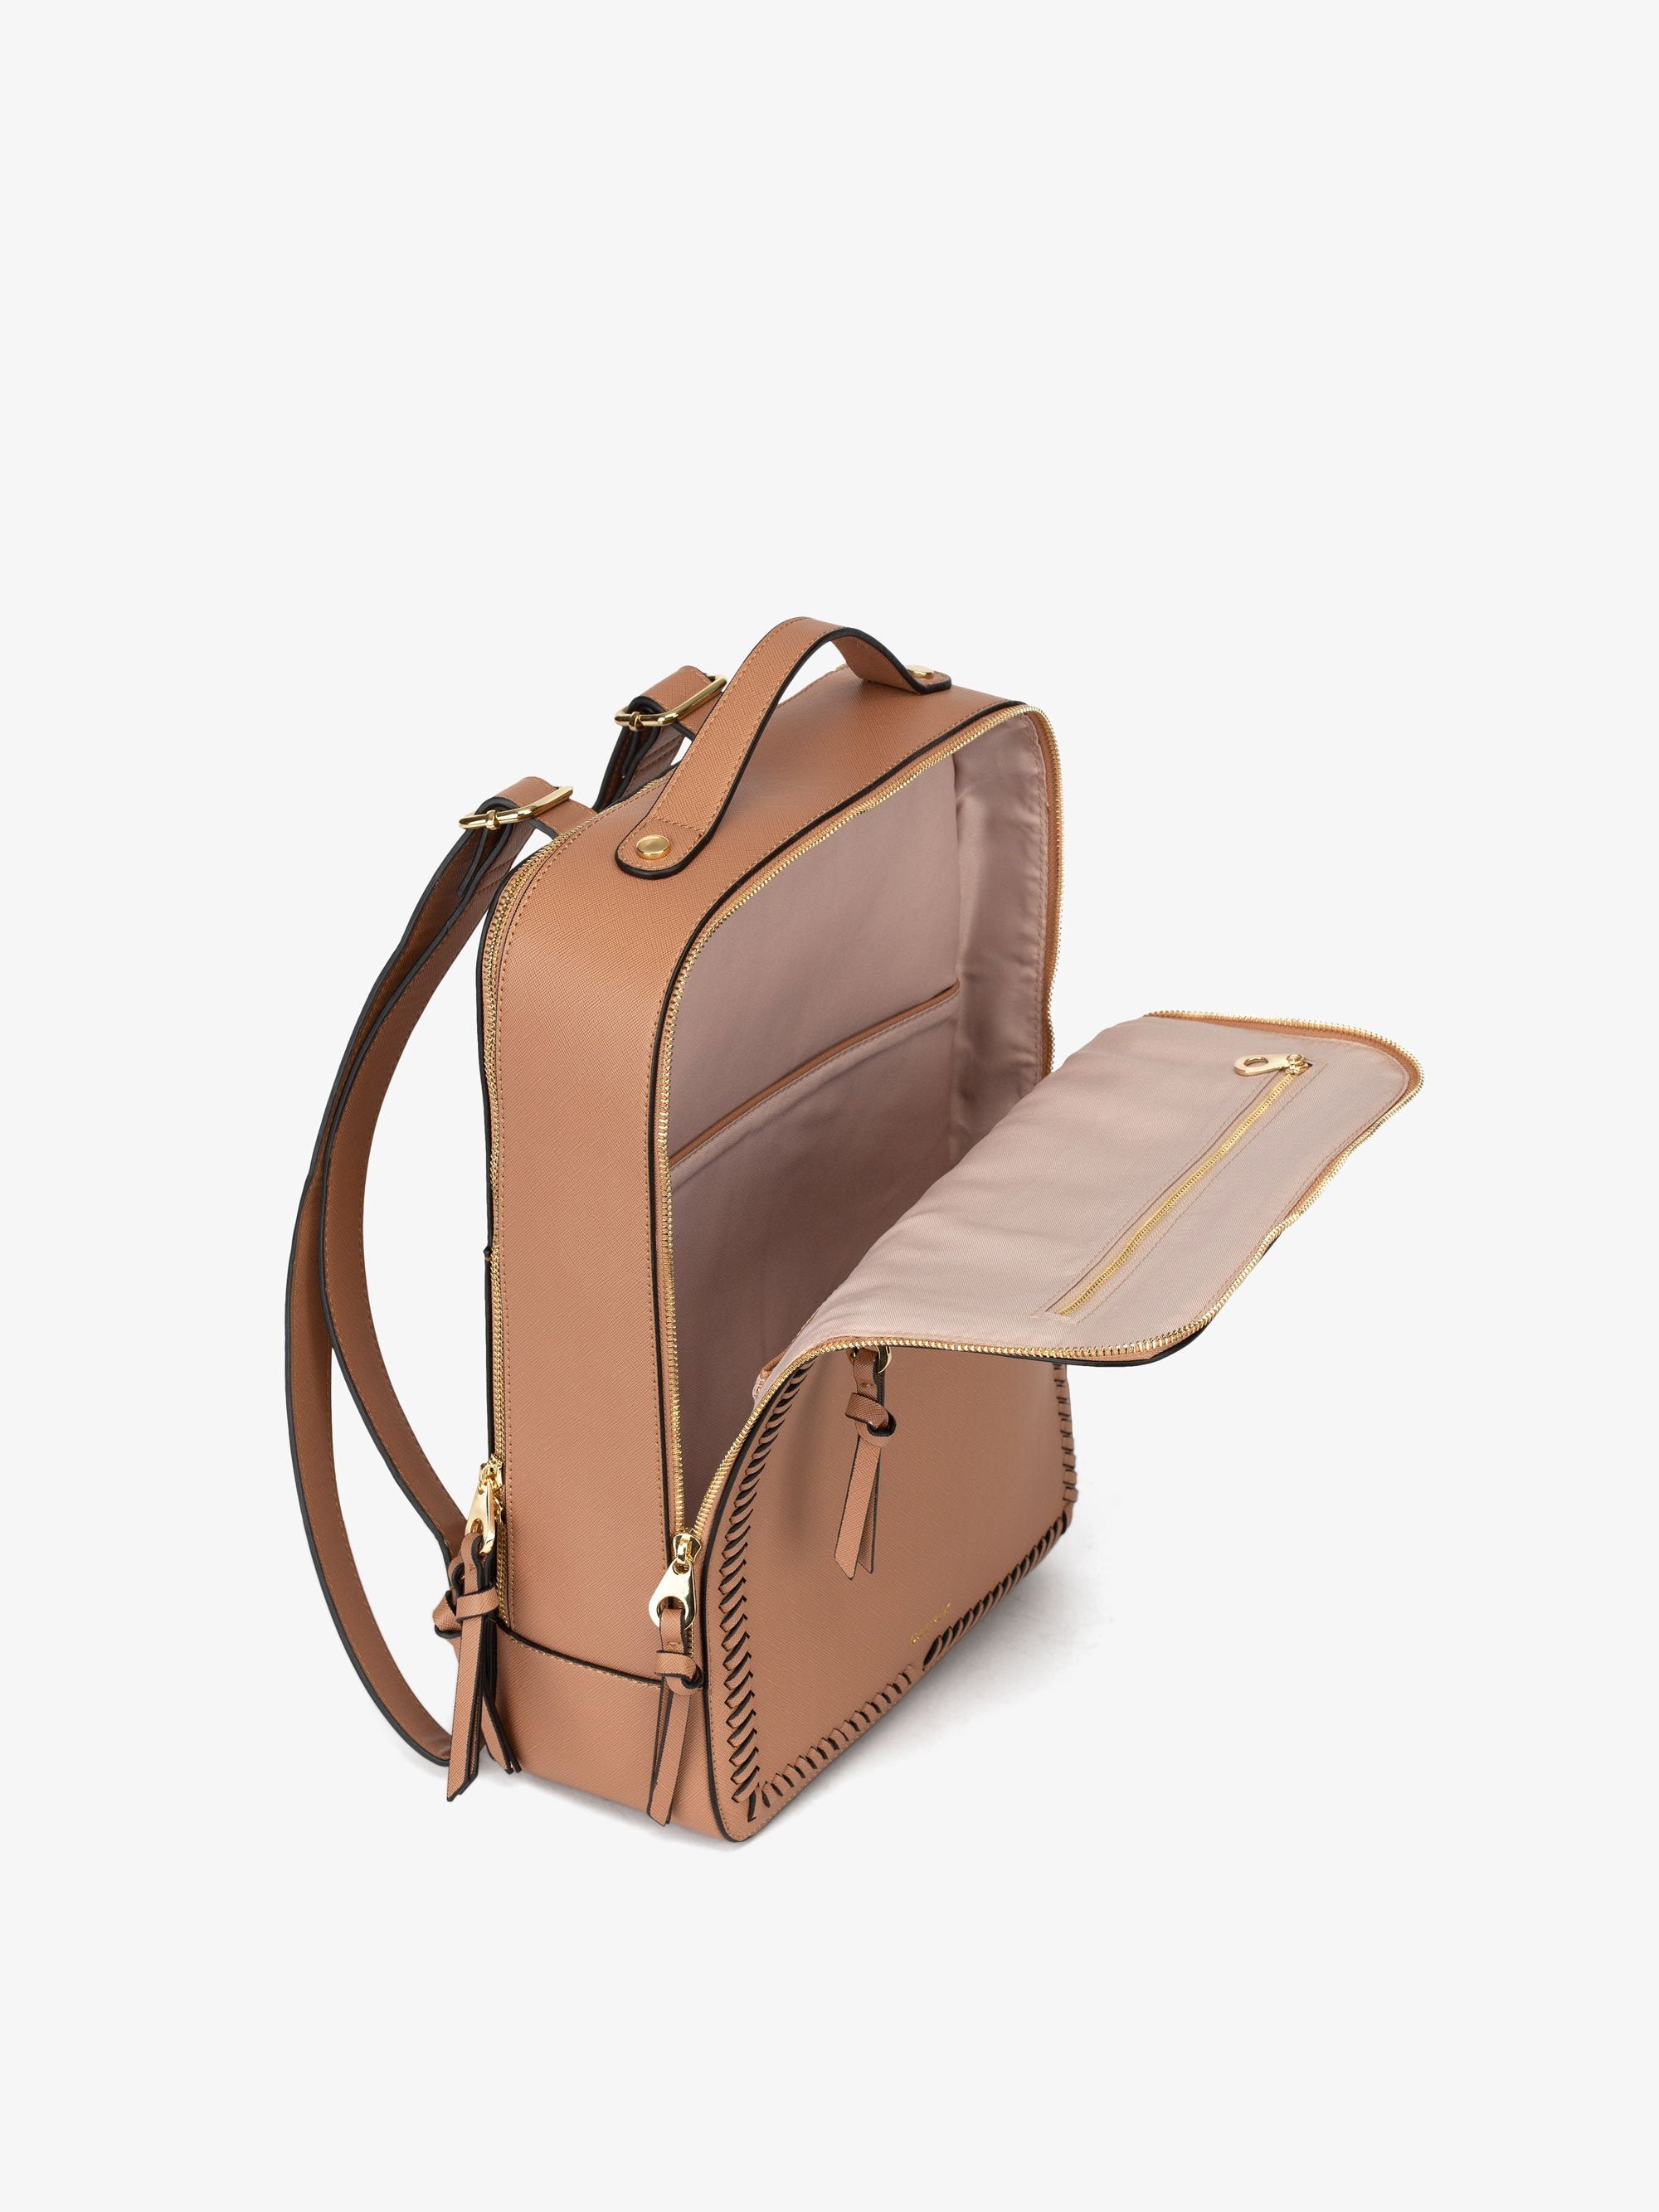 caramel brown CALPAK Kaya laptop backpack for women with zippered compartments